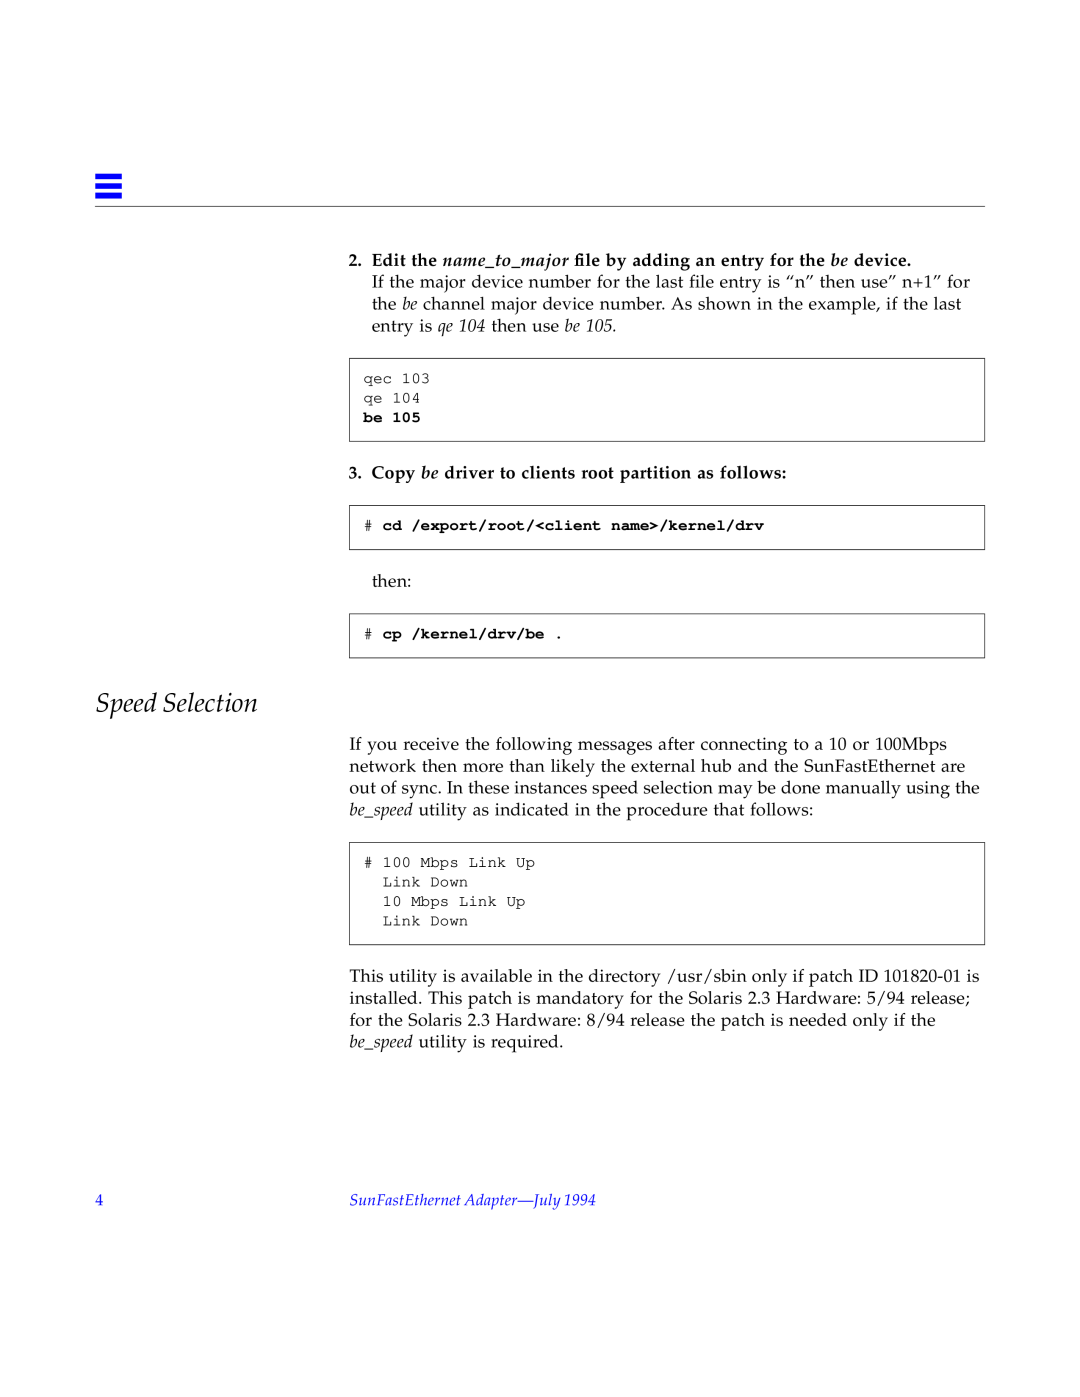 Sun Microsystems 802-1304-10 manual Speed Selection, Edit the nametomajor file by adding an entry for the be device 